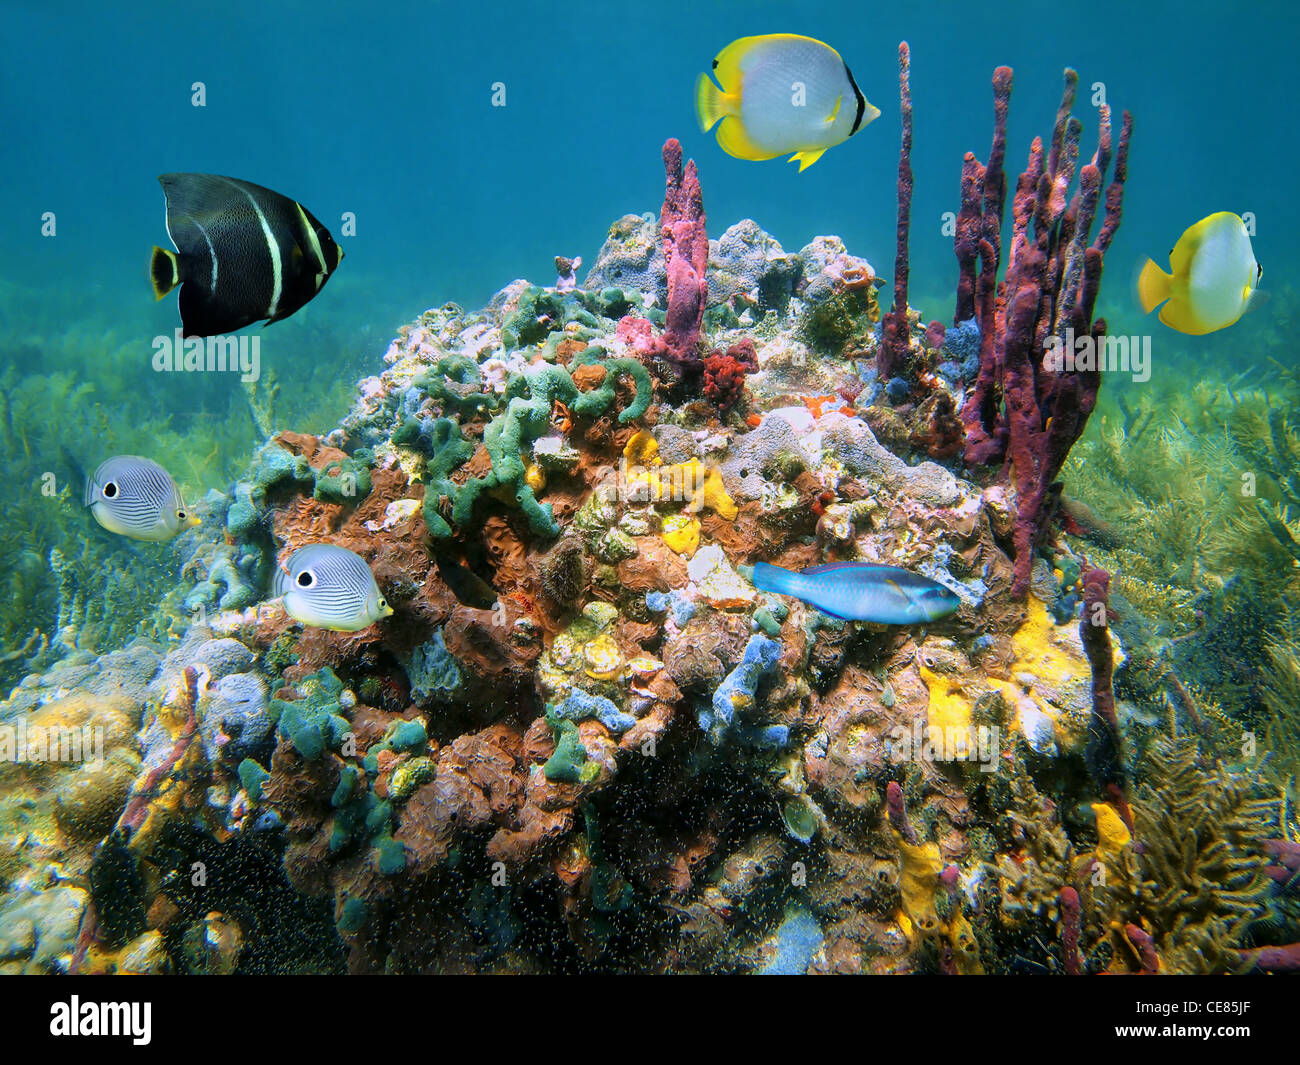 Colorful marine life with sea sponges and tropical fish underwater sea, Caribbean Stock Photo